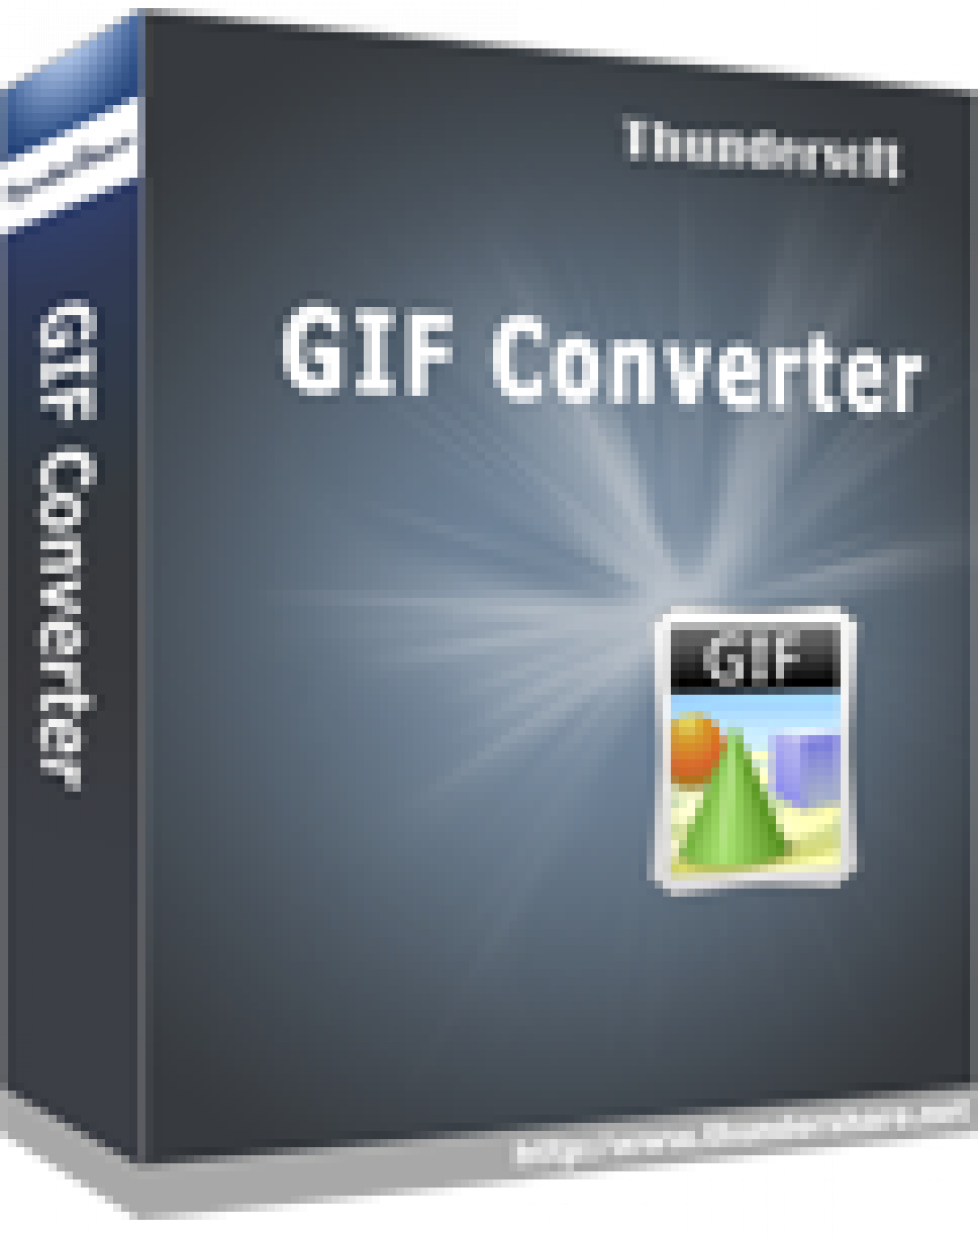 ThunderSoft GIF to Video Converter 5.2.0 download the last version for iphone